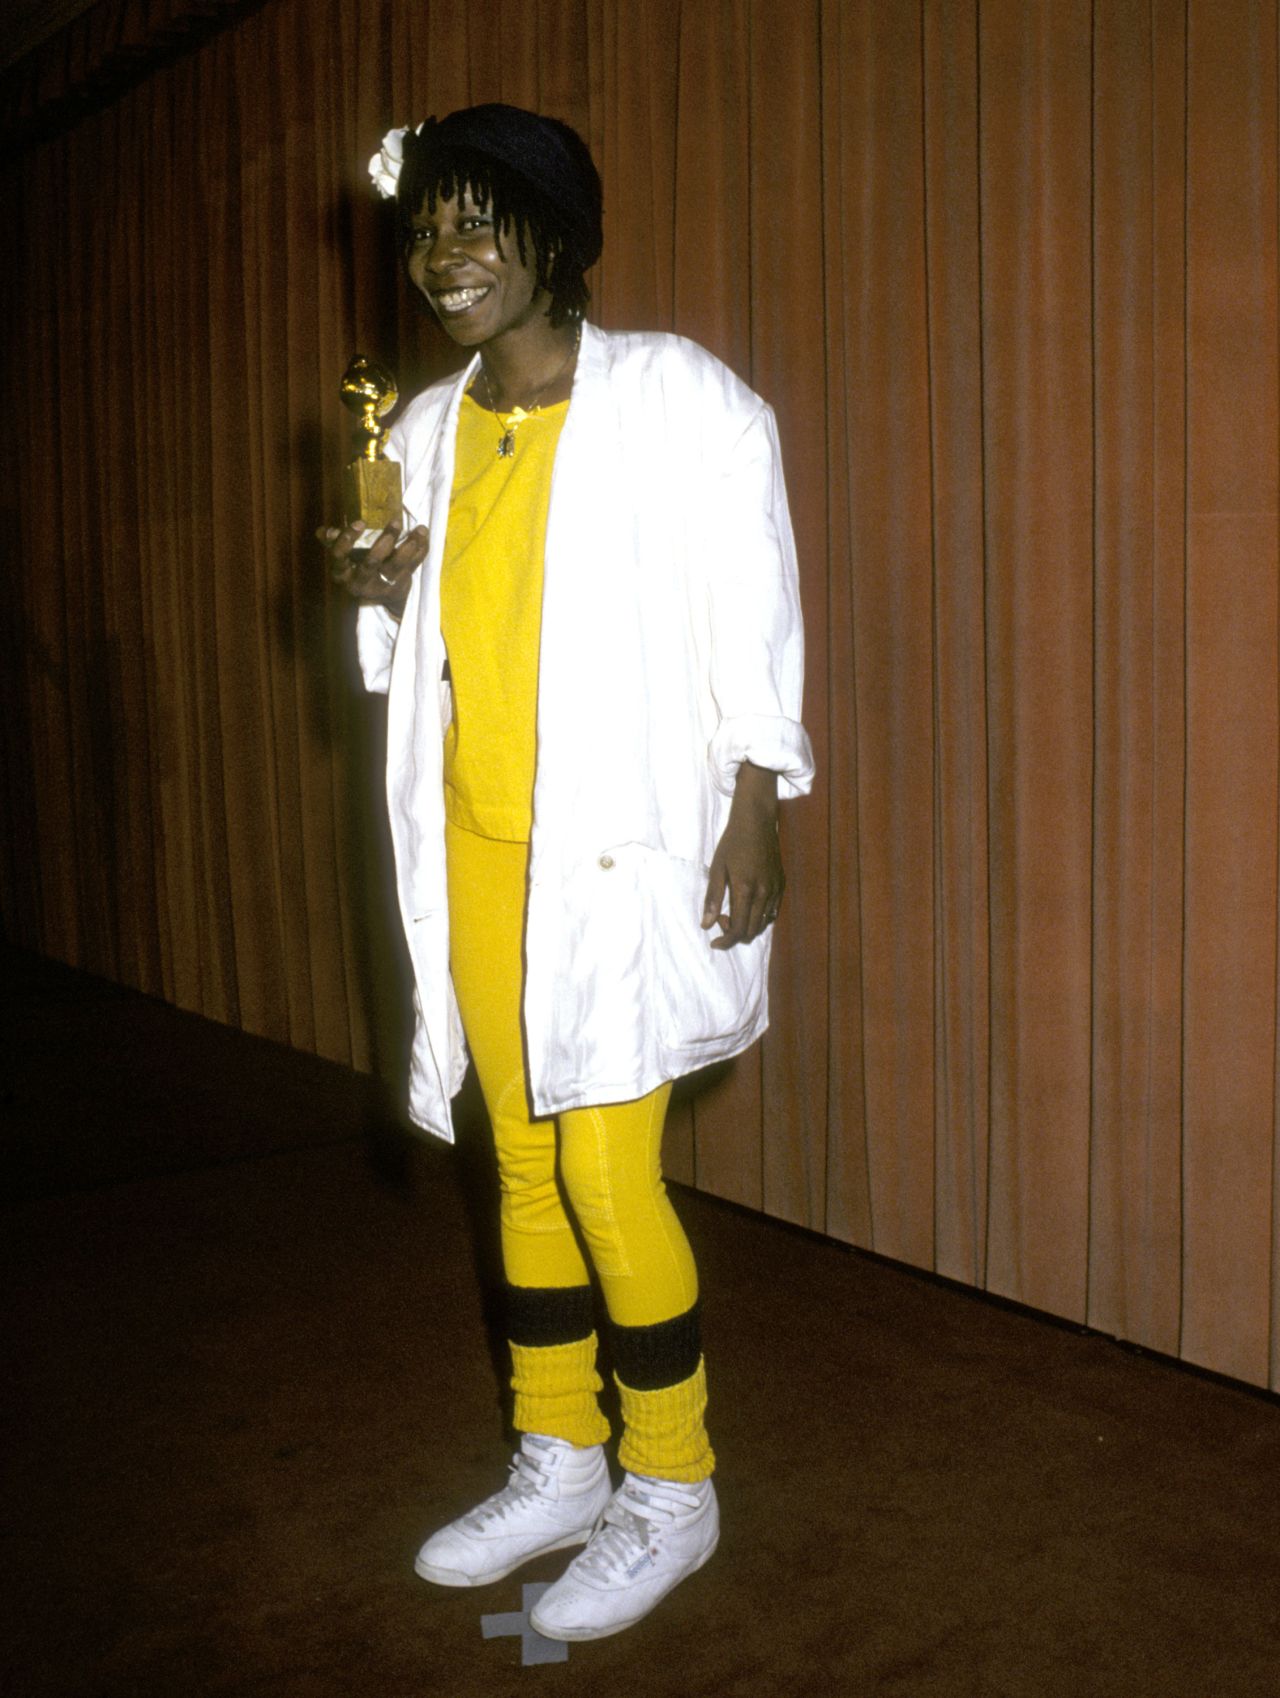 W is for Whoopi: Whoopi Goldberg took home a Golden Globe in 1986 for her performance in "The Color Purple." And she secured her place in the awards' fashion history with one of the red carpet's oddest looks, combining a white blazer with yellow leggings, leg-warmers and a pair of white Reebok sneakers. 